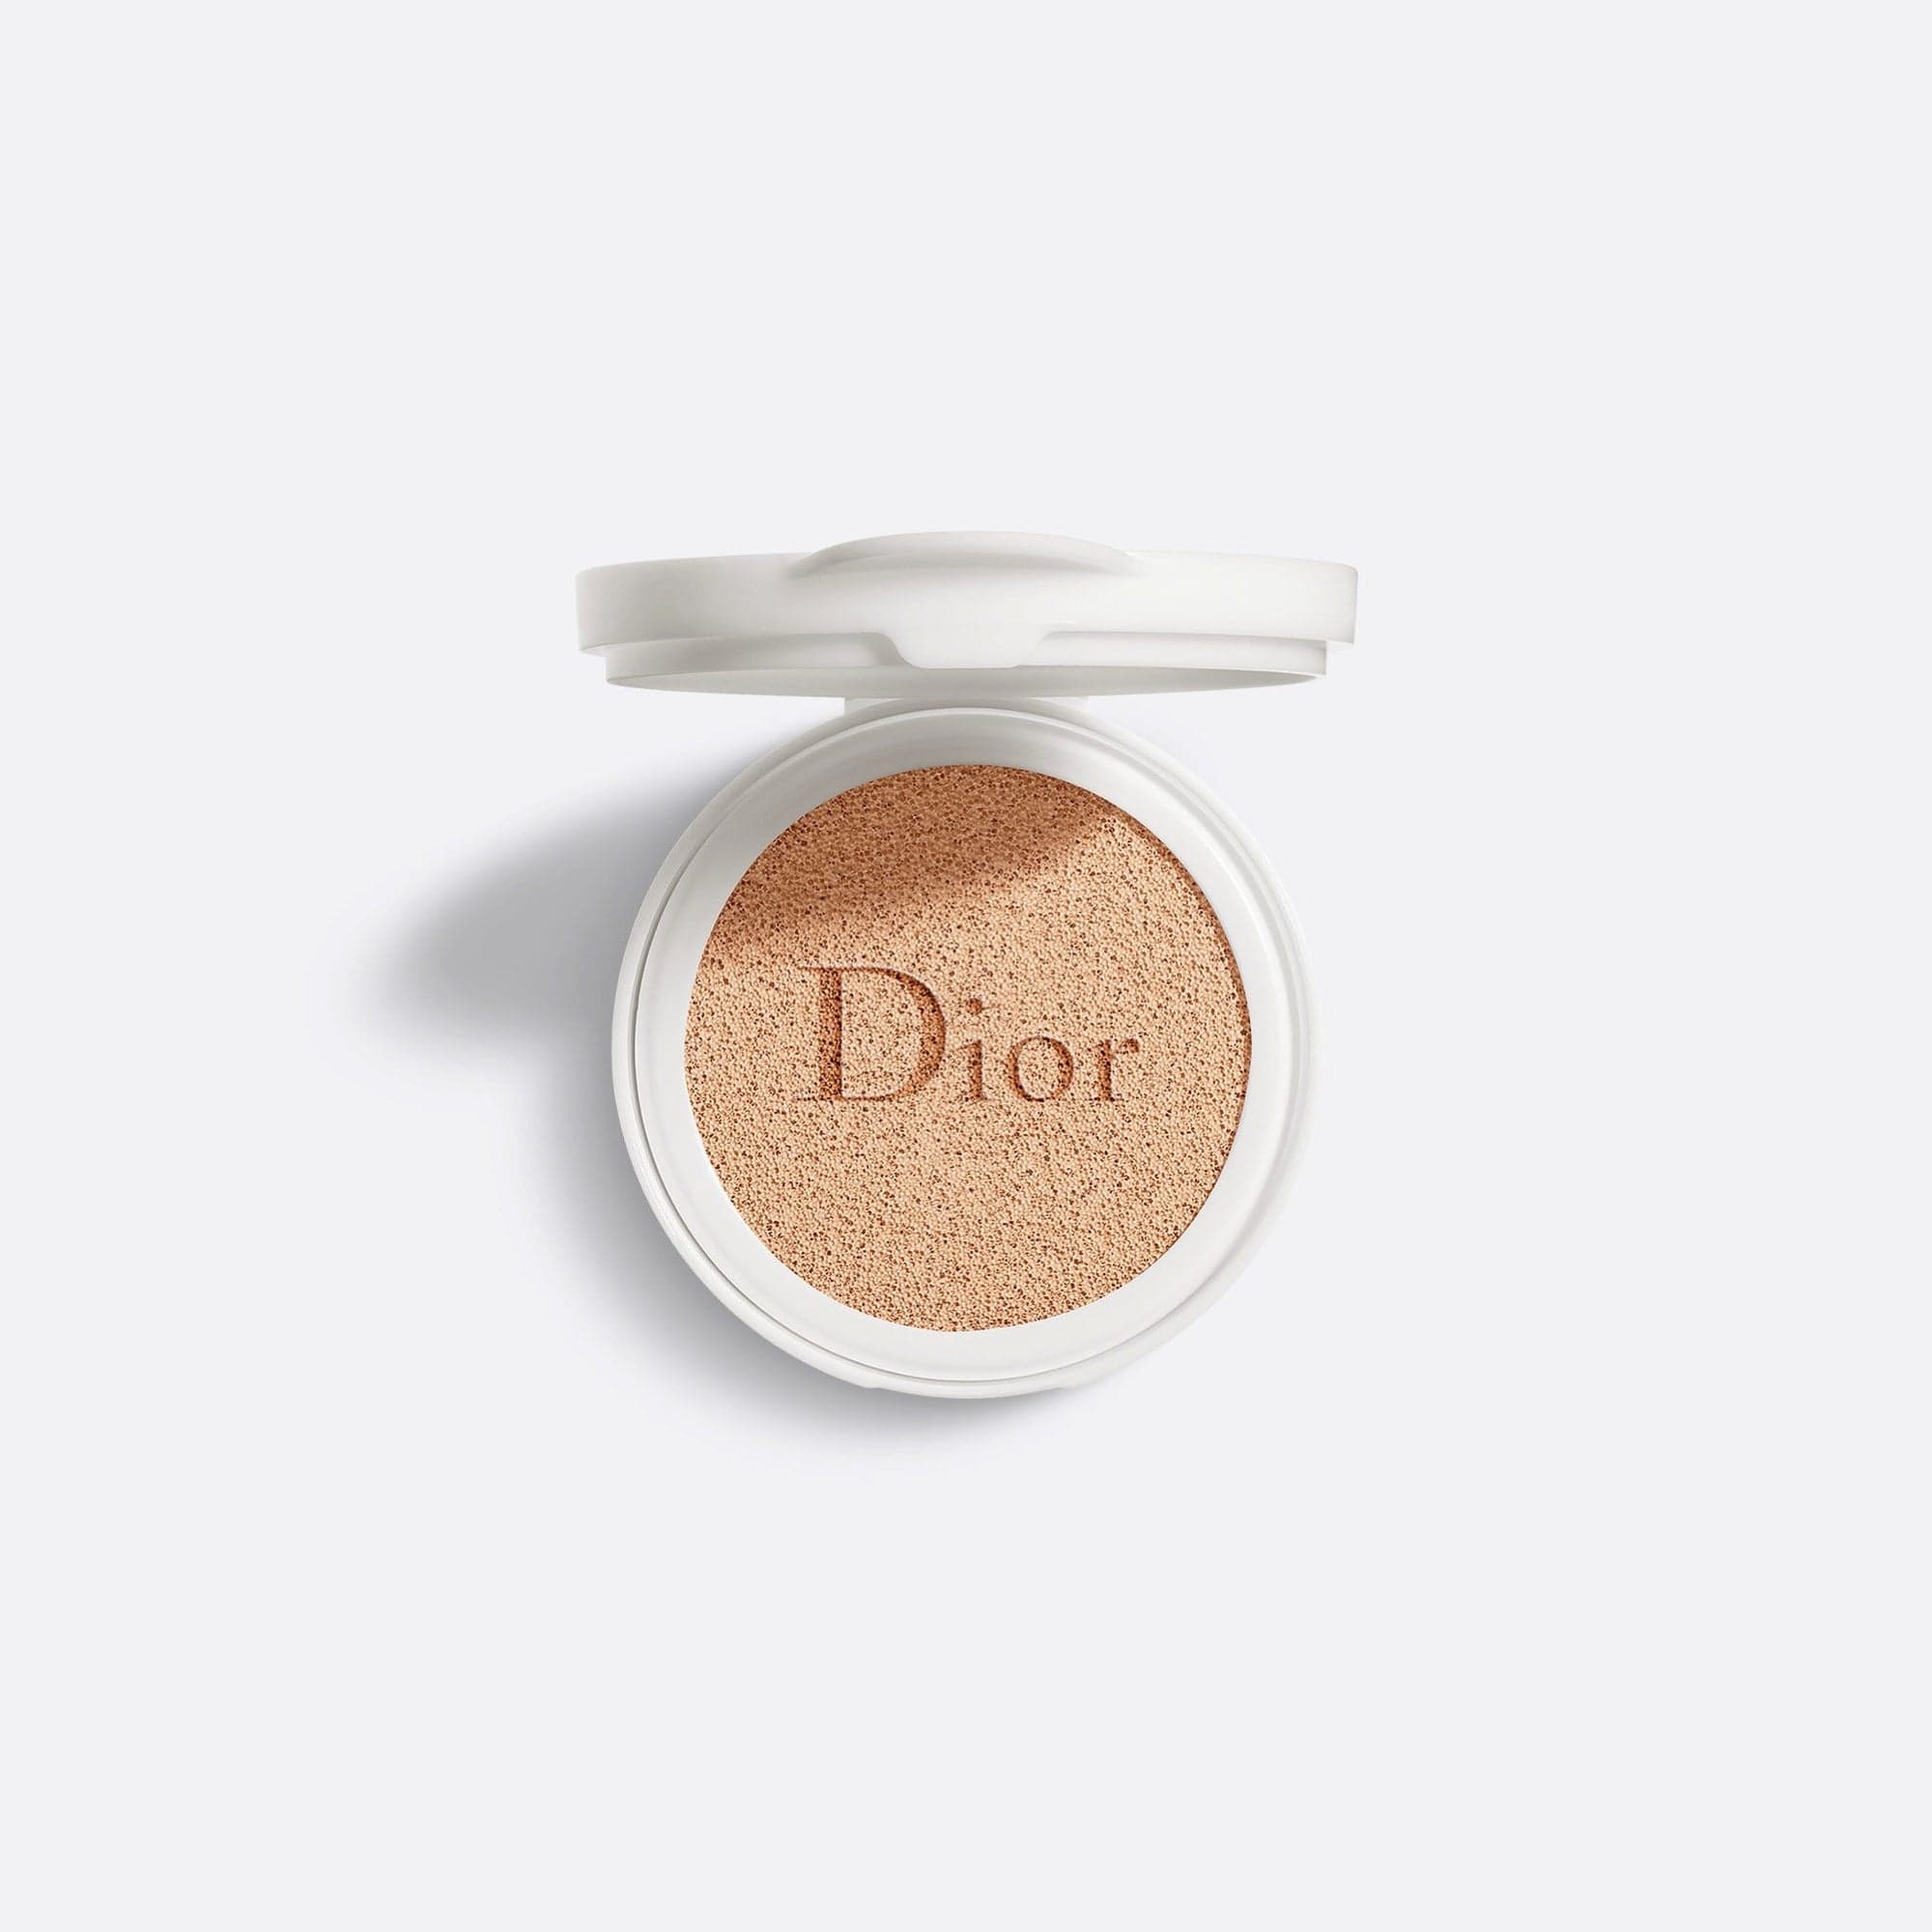 Diorsnow Perfect Light Perfect Glow Cushion SPF 50 - PA +++ Refill